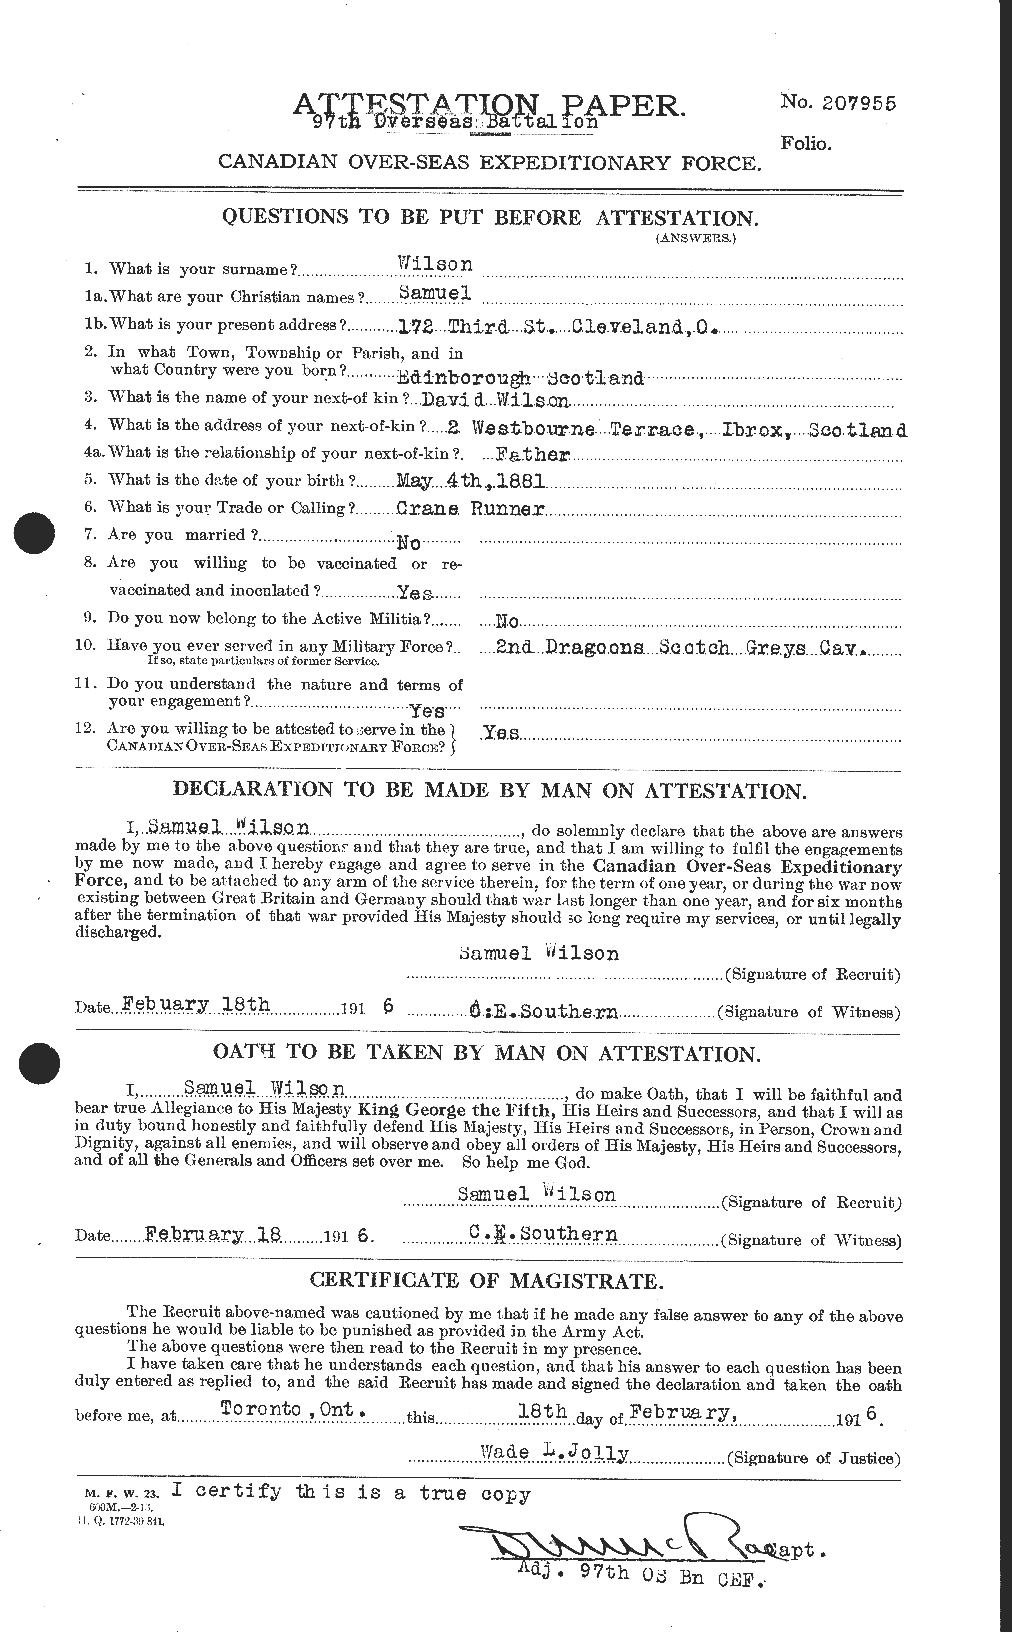 Personnel Records of the First World War - CEF 681106a